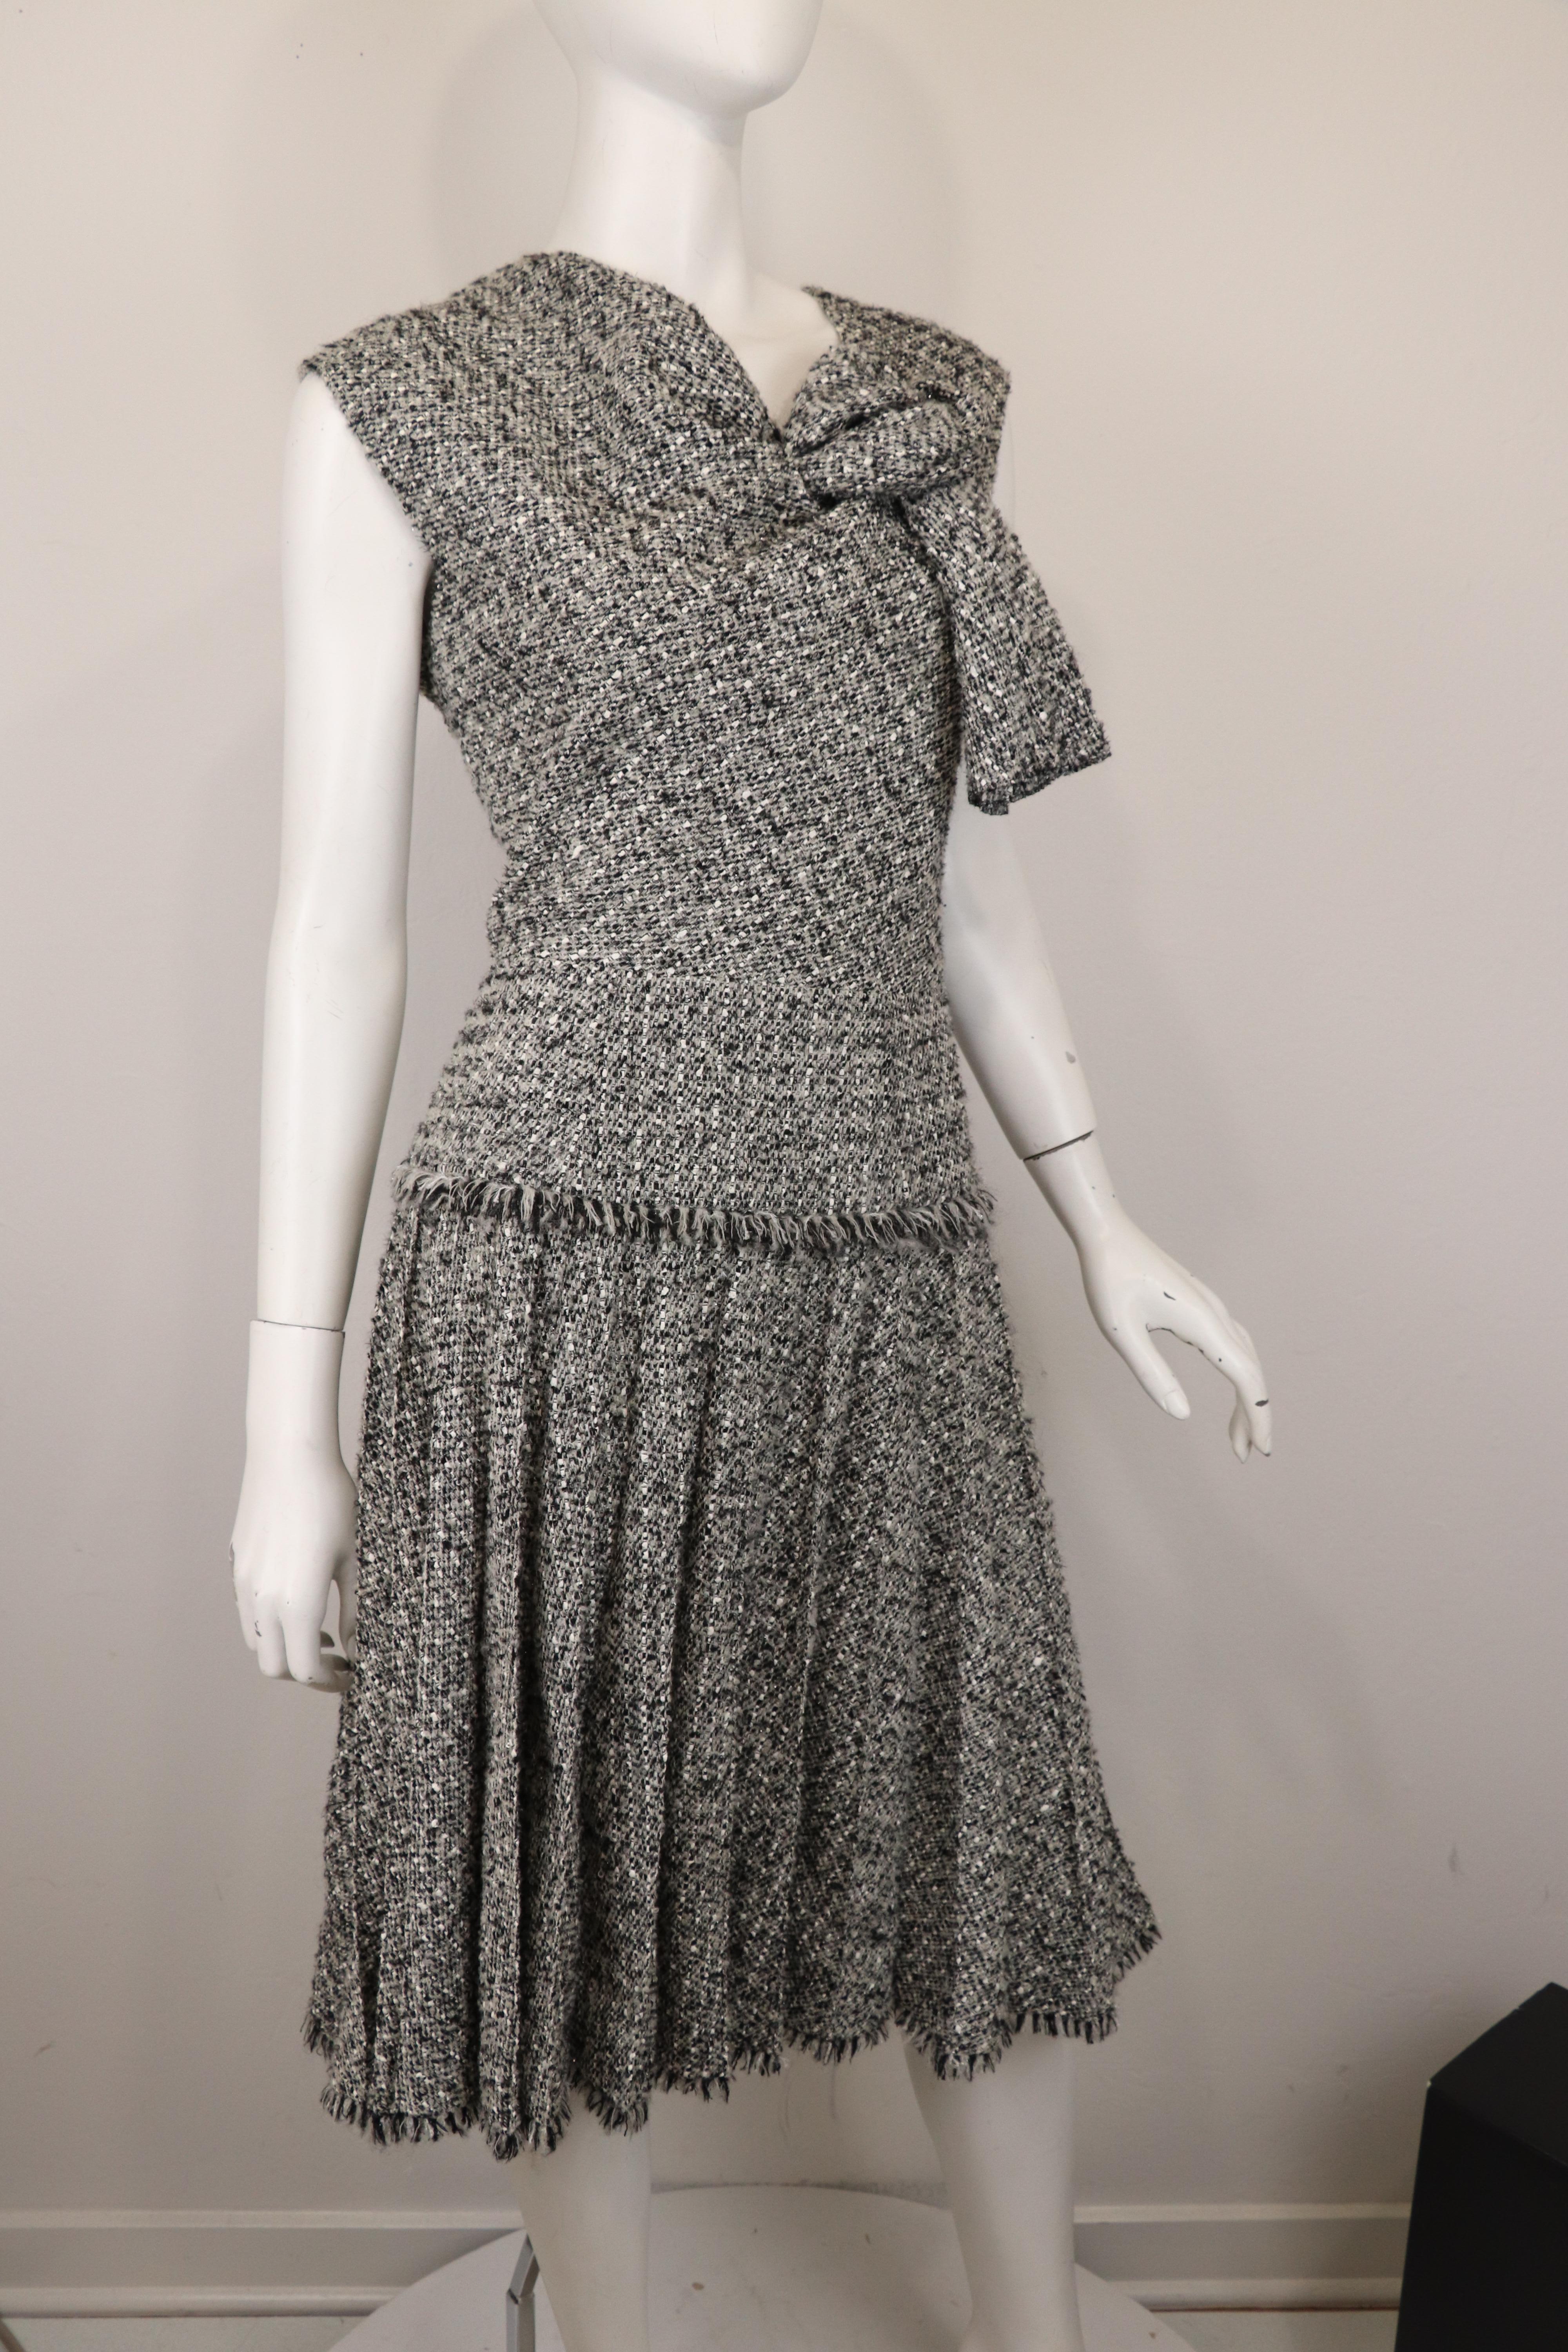 This beautiful sleeveless fit and flare Oscar de la Renta dress offers a stunning silhouette with its metallic woven fabric composed of grey, black and cream and a knotted neckline with a defined waist and a pleated skirt. Dress is fully lined in